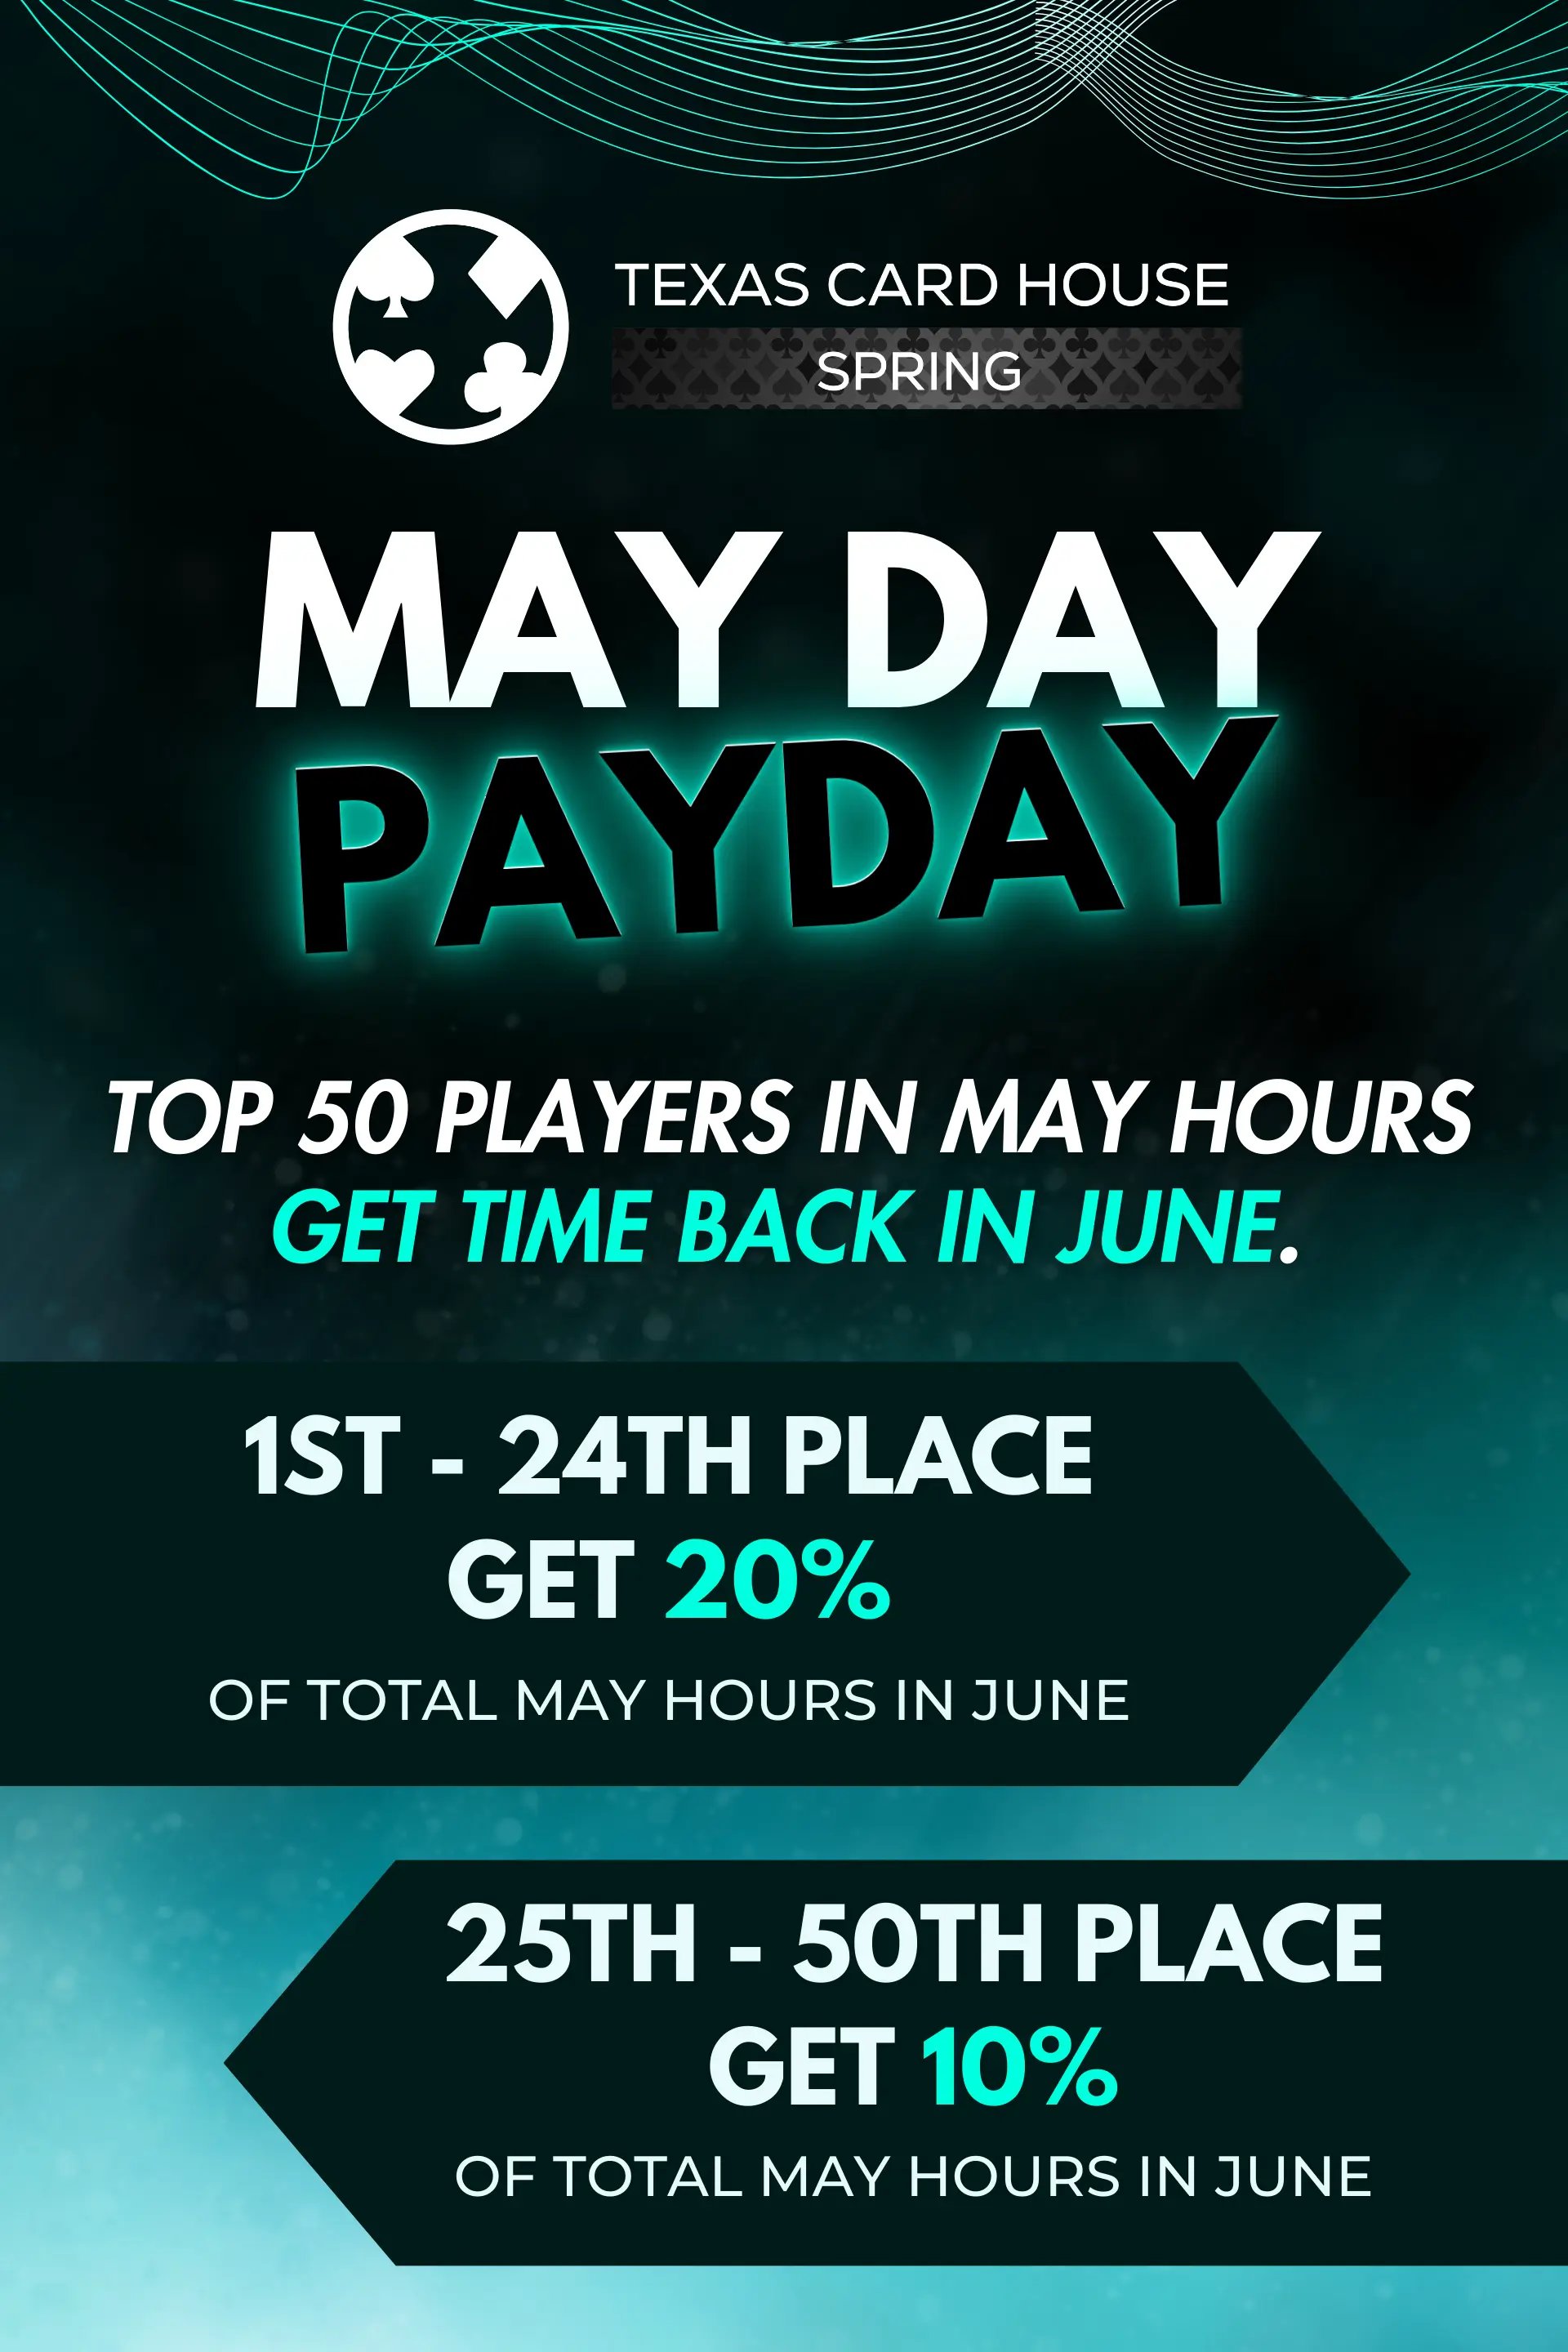 MAY DAY PAYDAY  Promo at TCH Spring